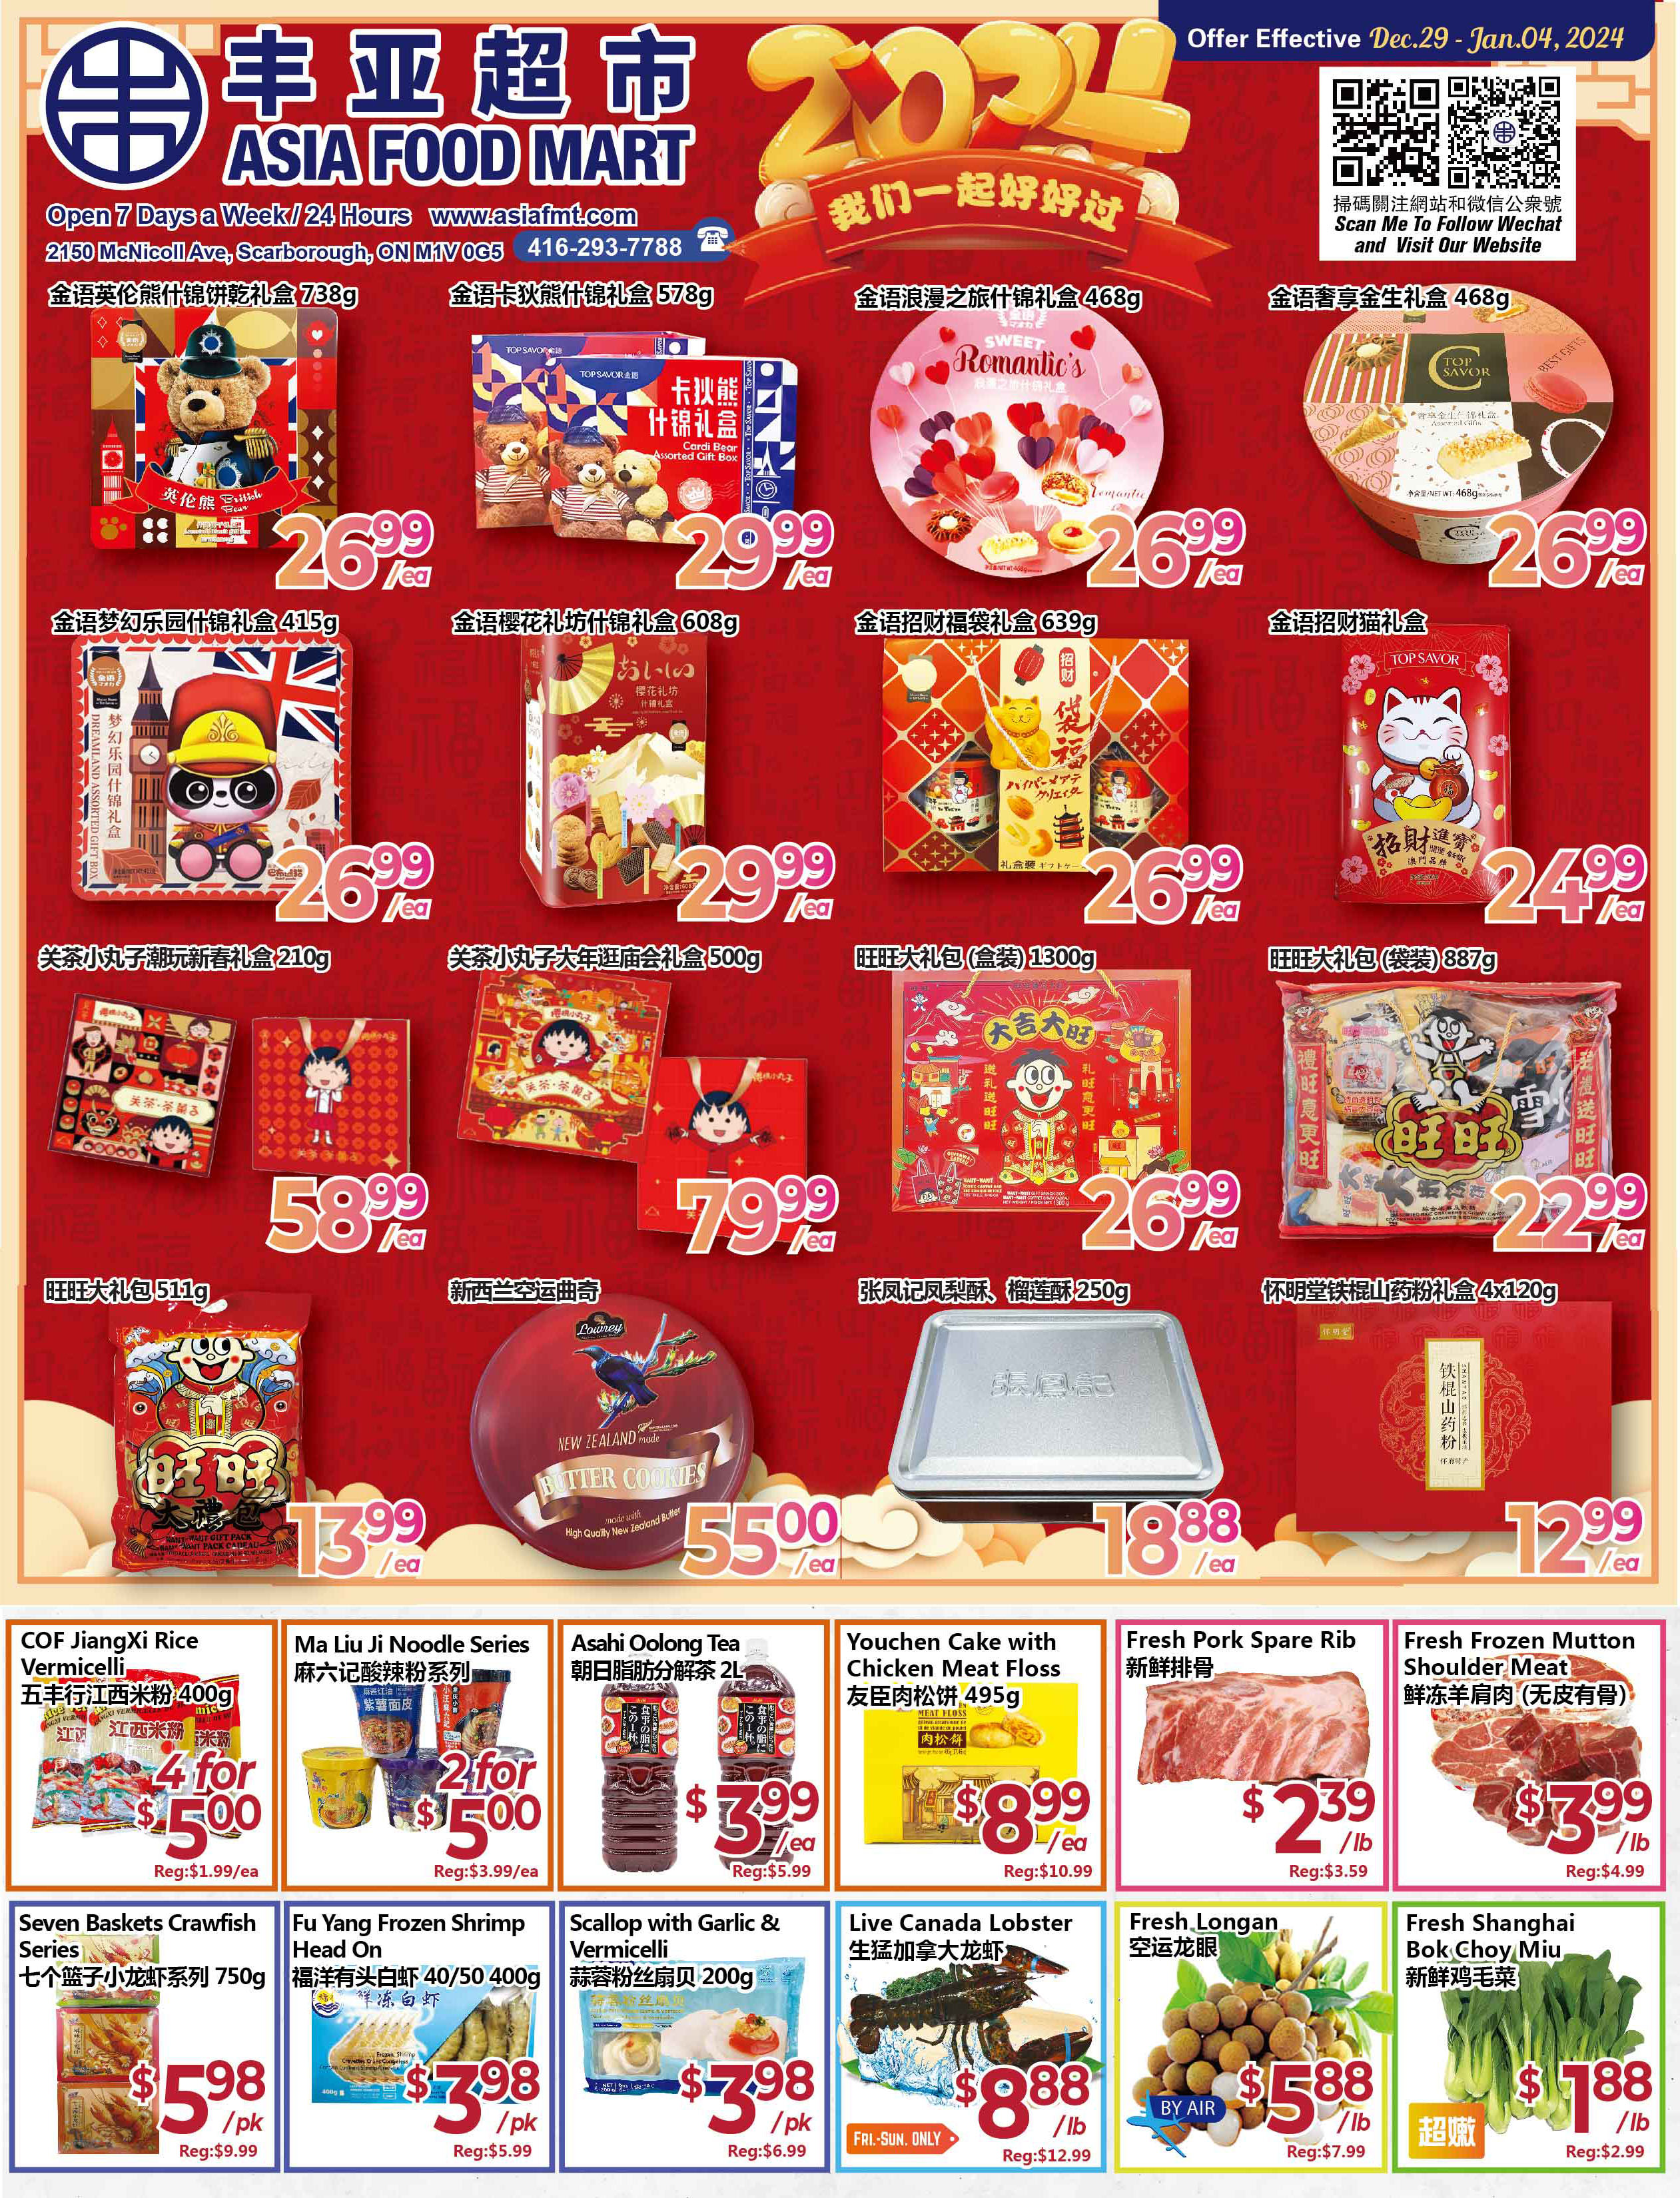 Asia Food Mart Flyer, December 29, 2023 to January 4, 2024, Page 1